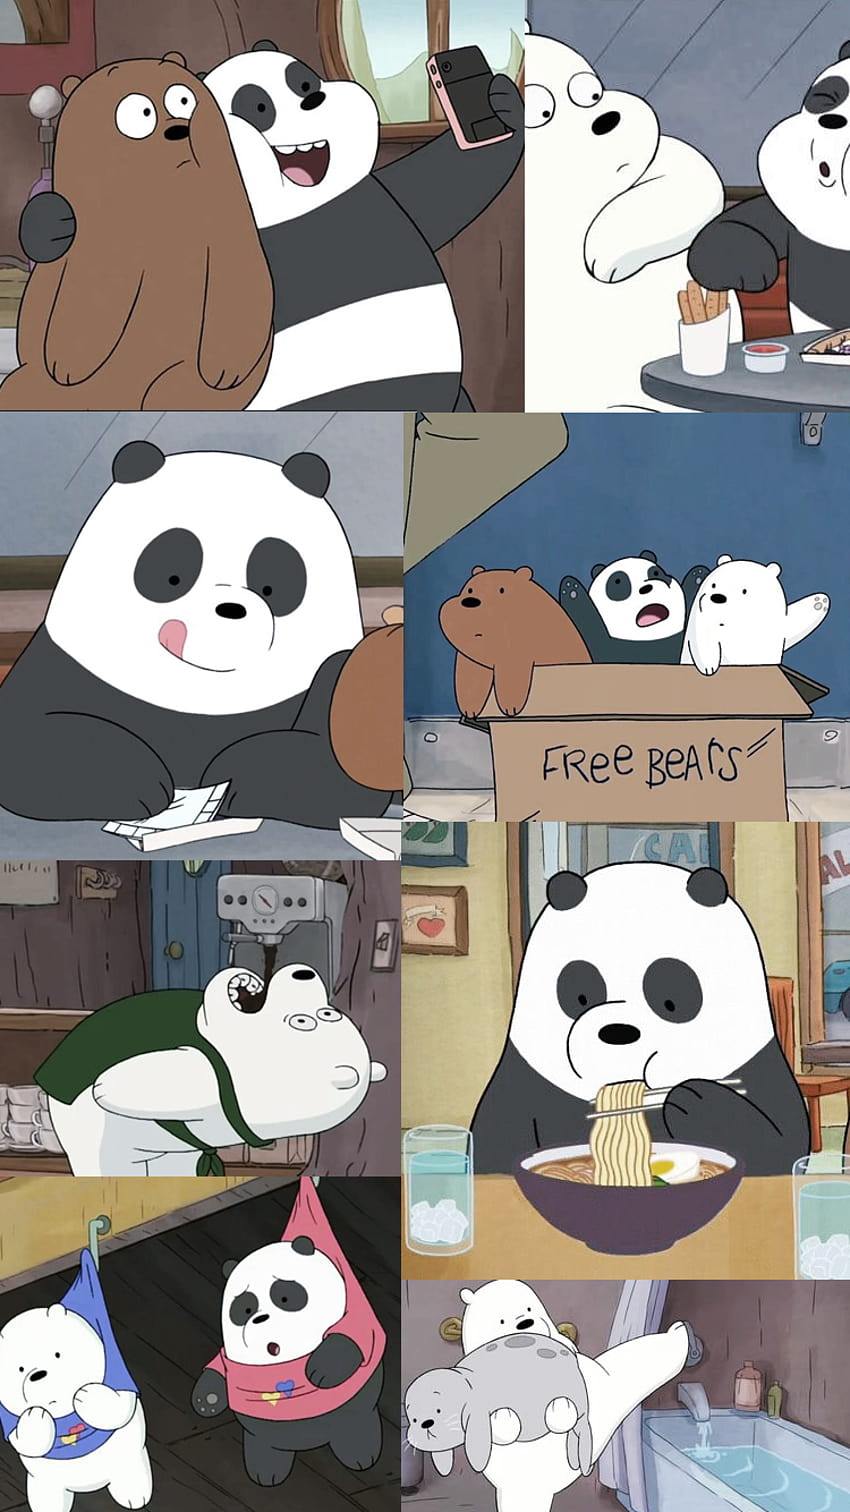 A collection of pictures showing different panda bears - We Bare Bears